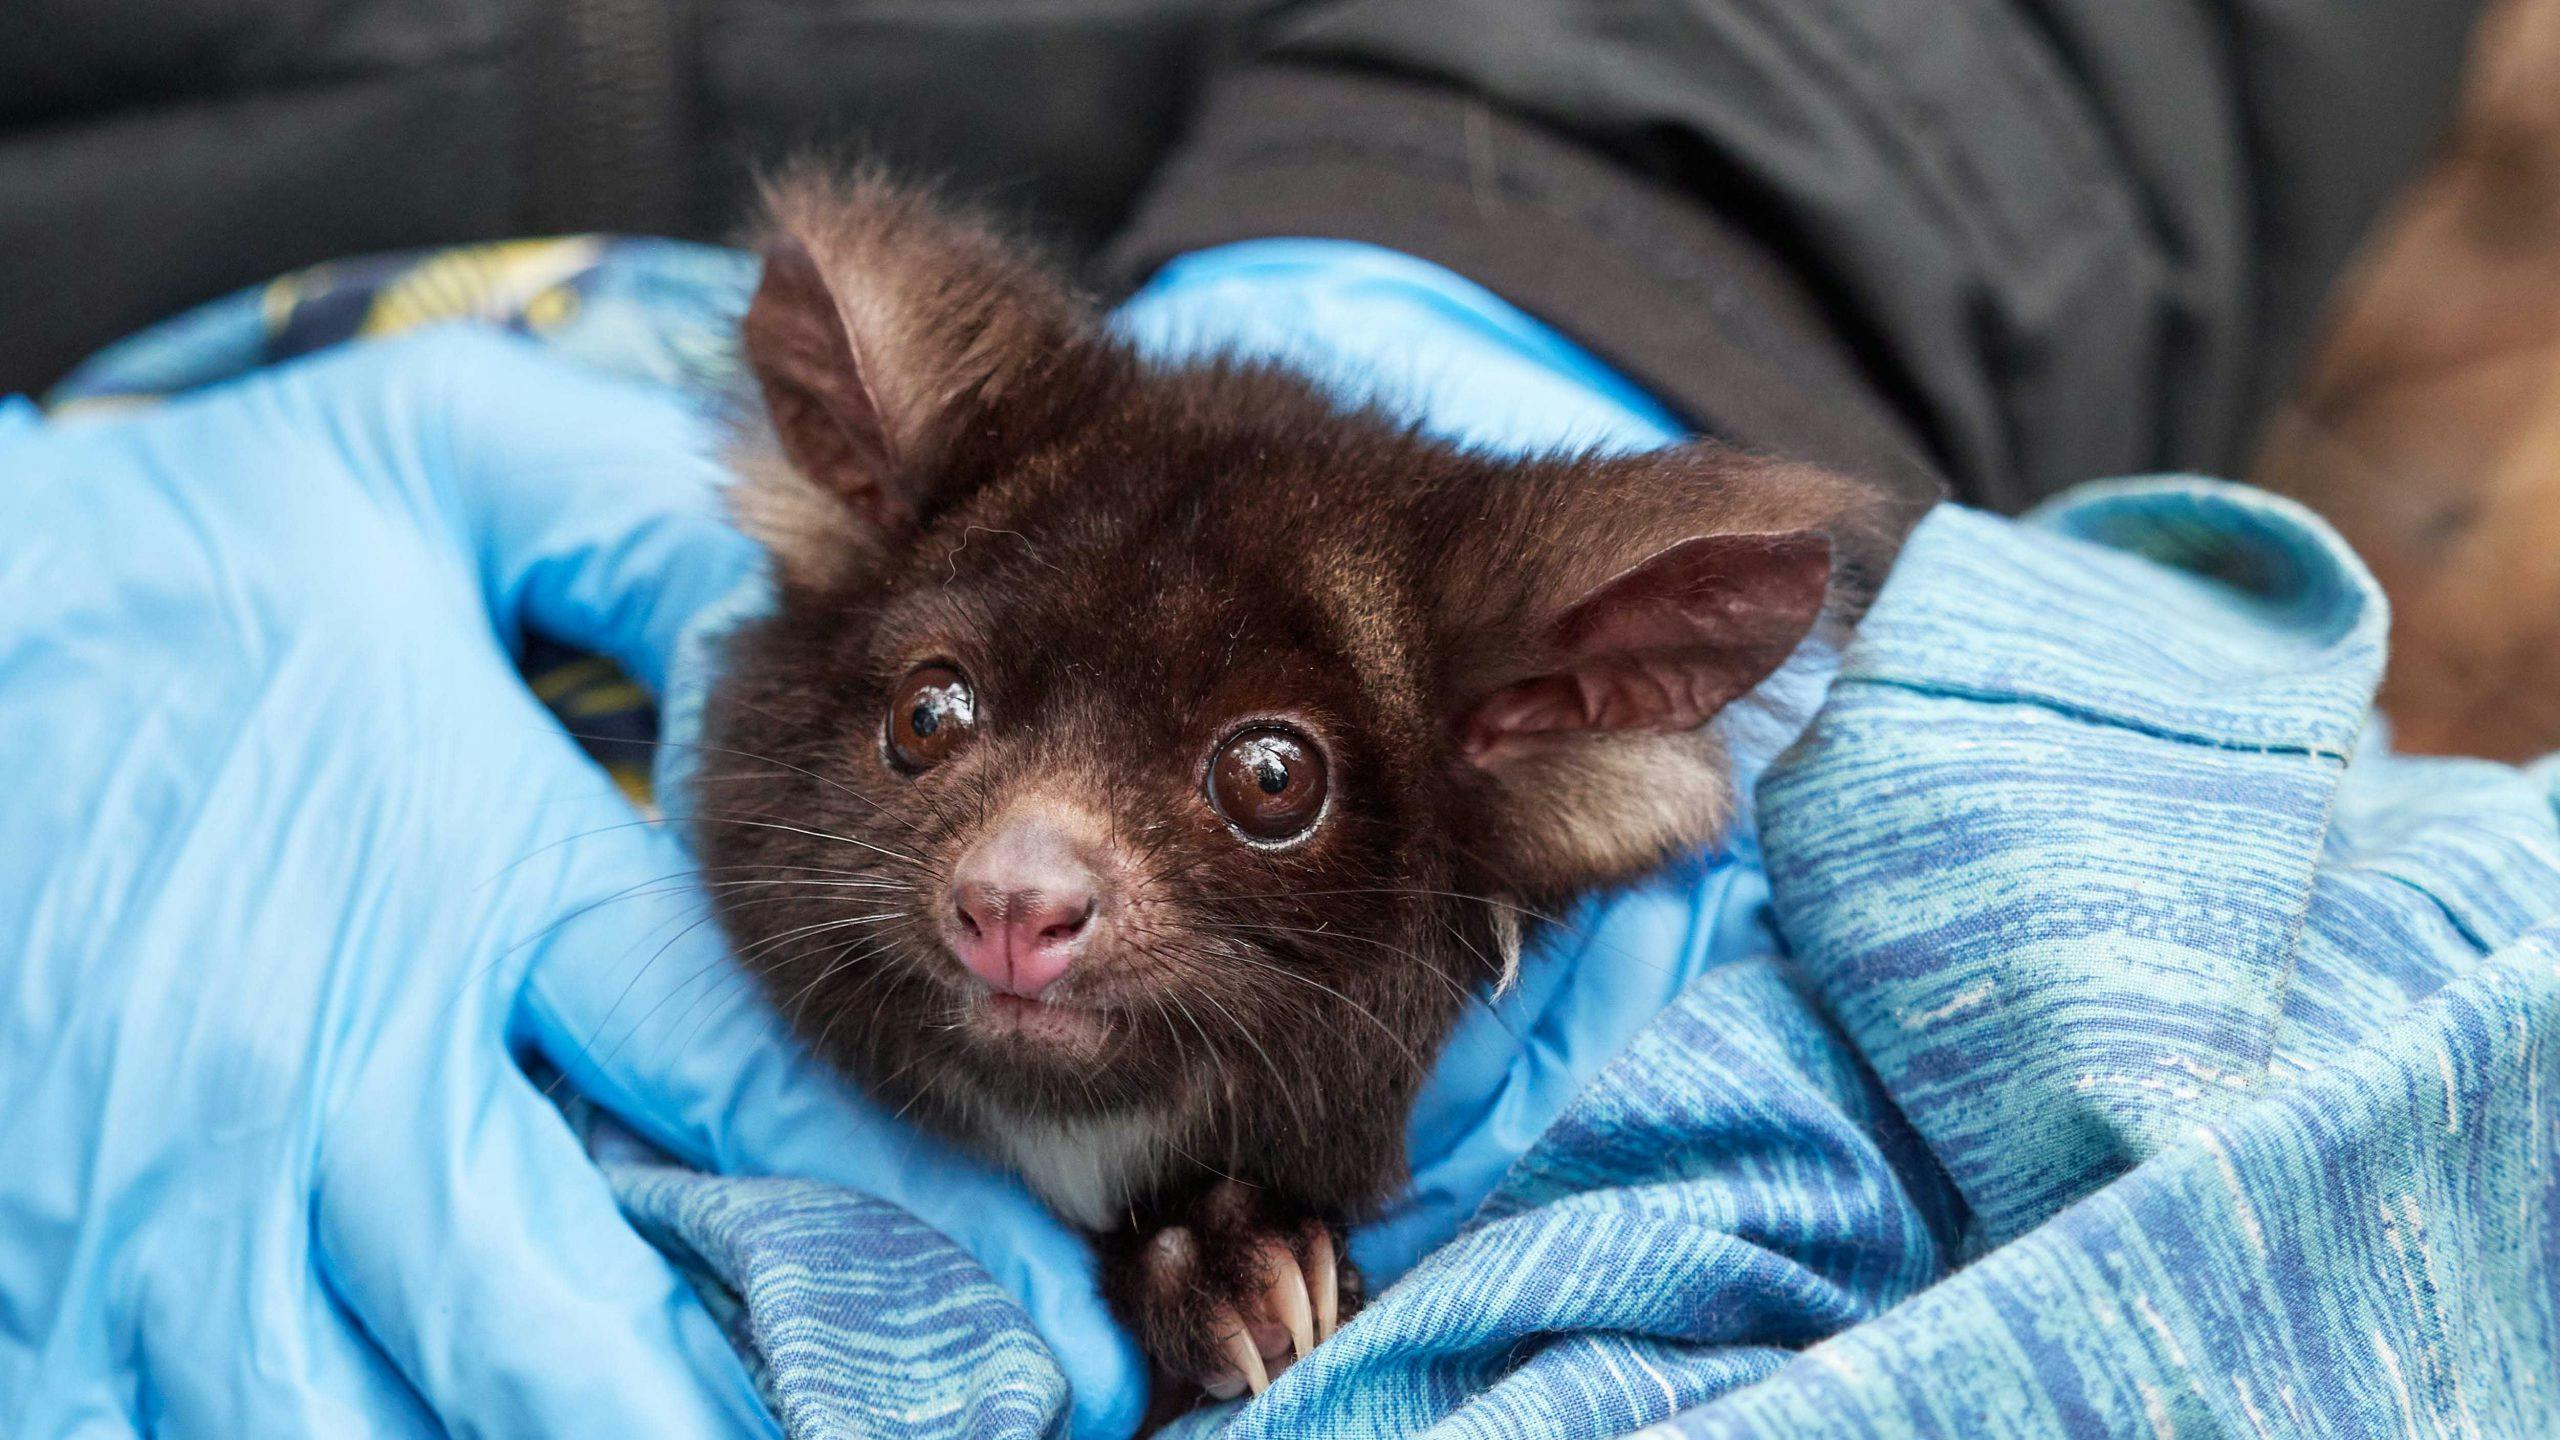 Greater glider is being held by a person with blue gloved hands and is wrapped in a blue blanket